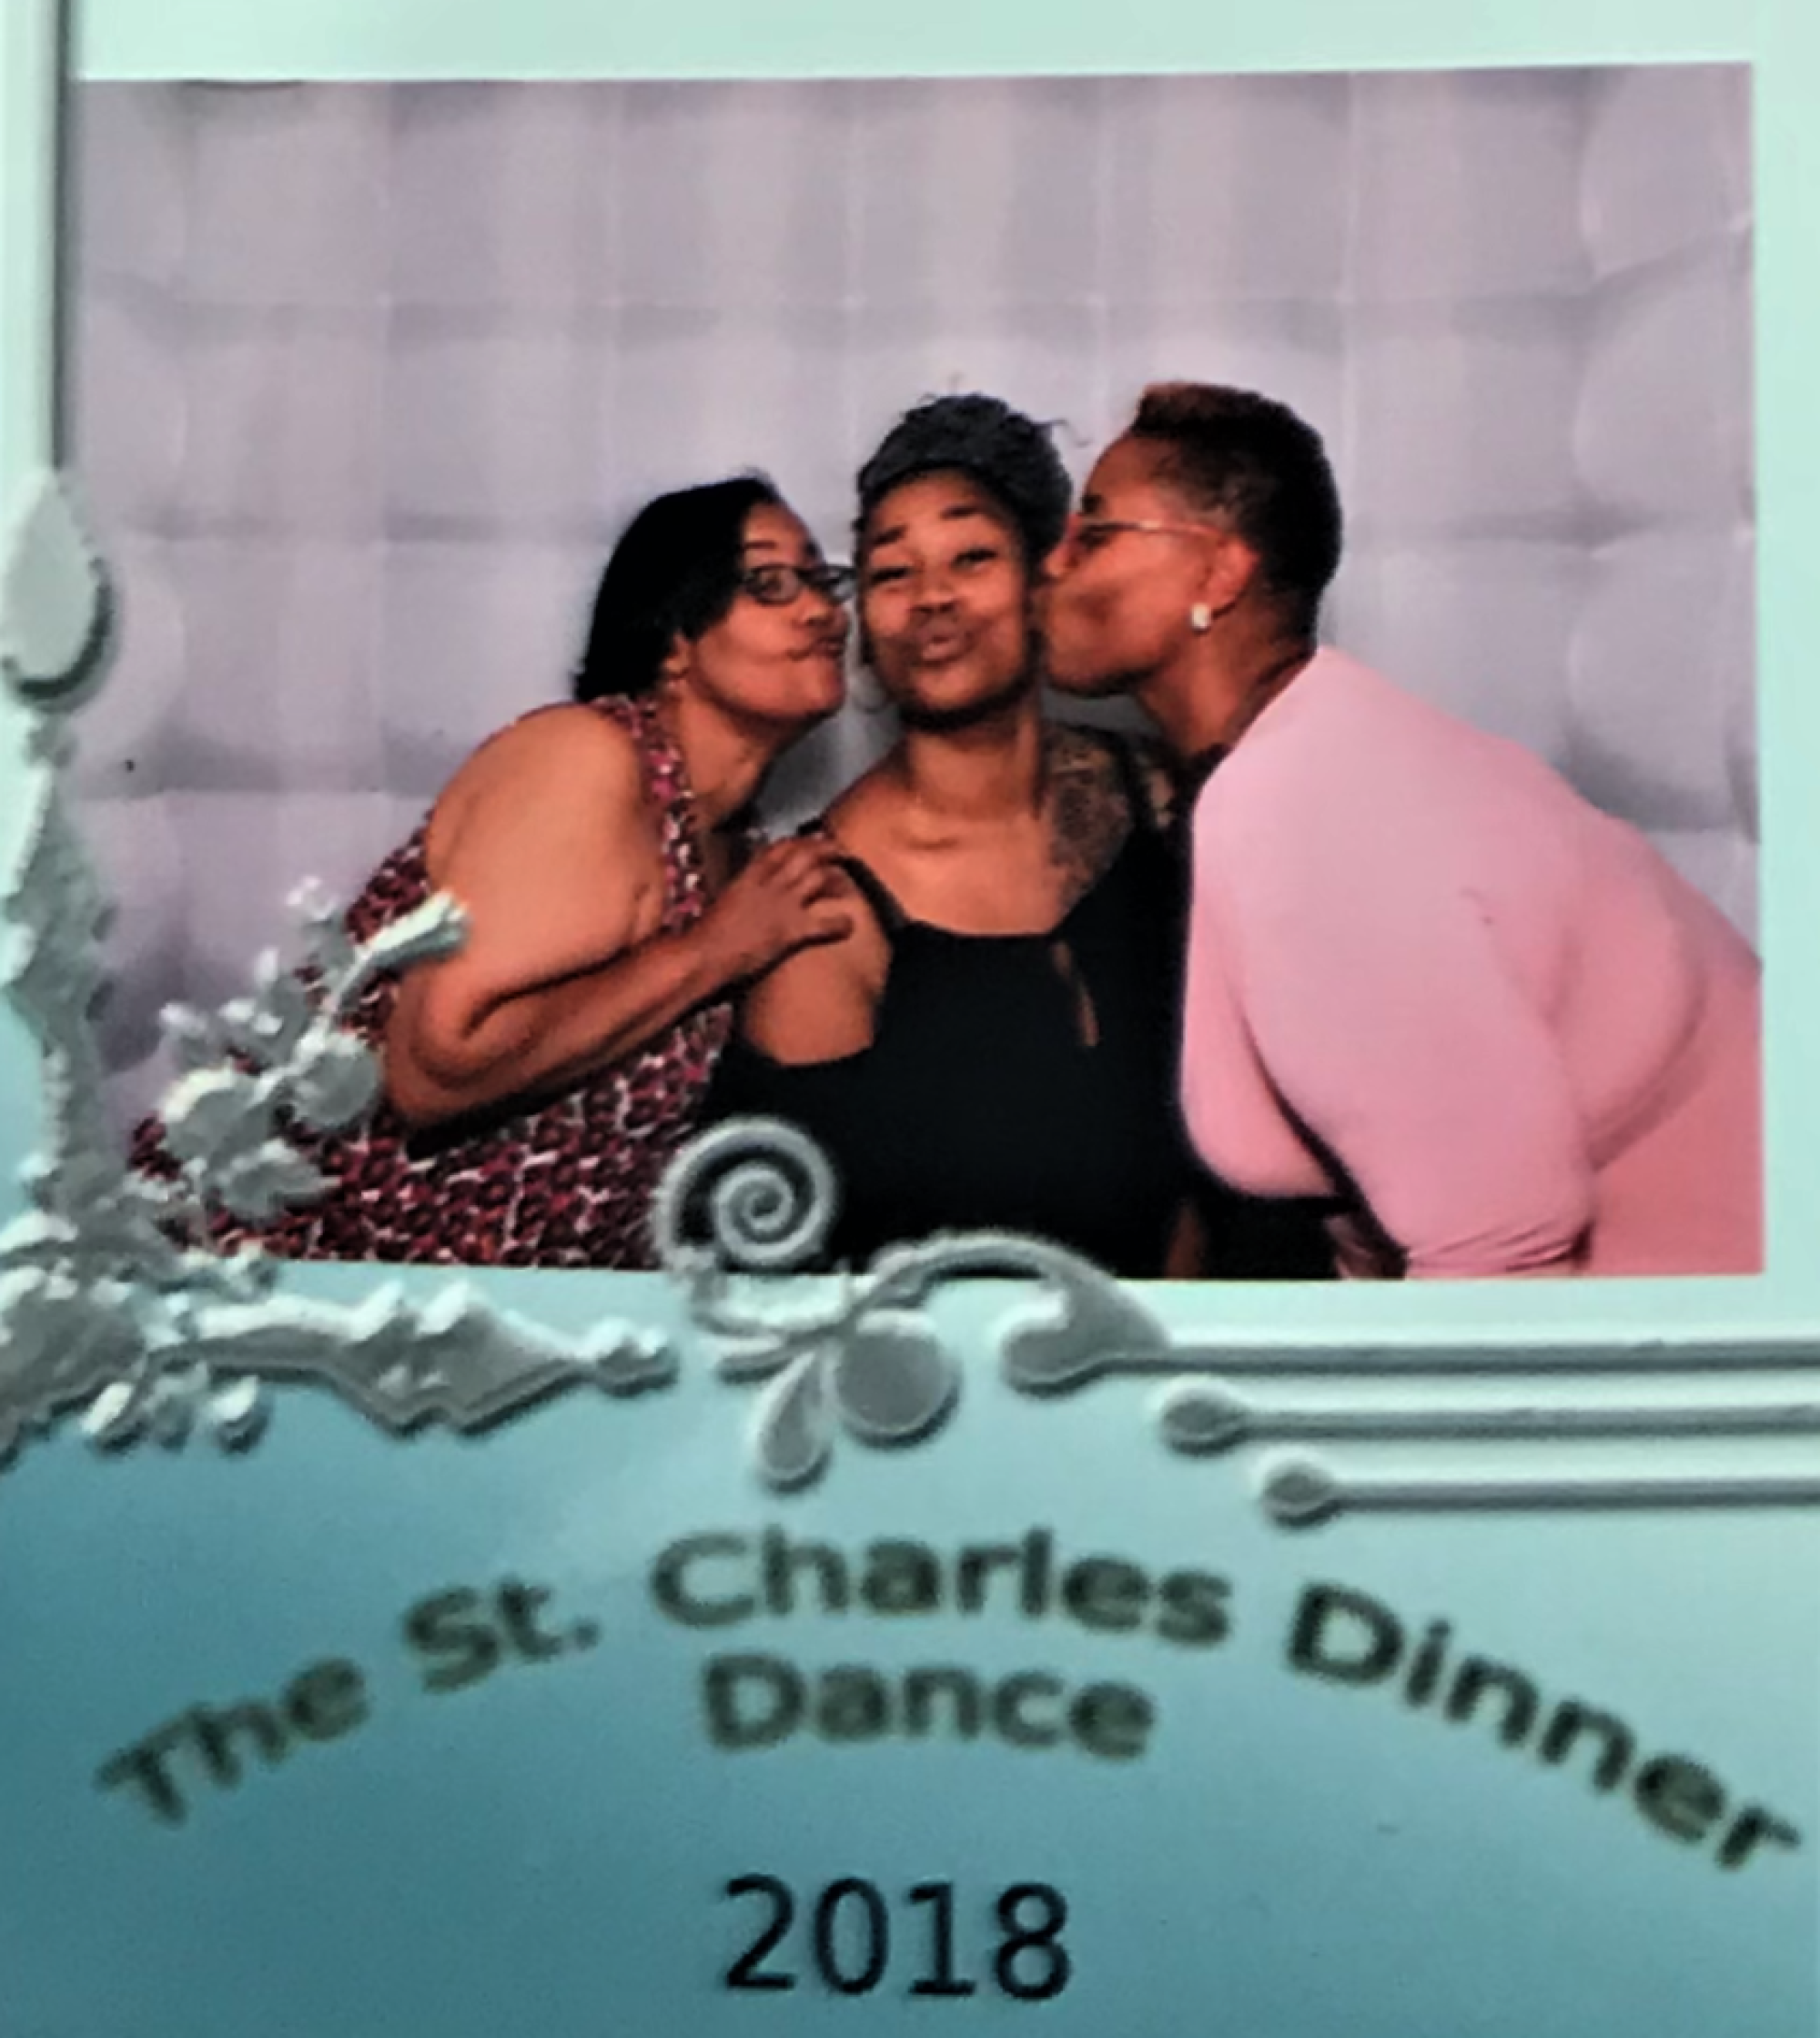 A woman, flanked by two others, blows a kiss. A sign below says The St. Charles Dinner Dance 2018